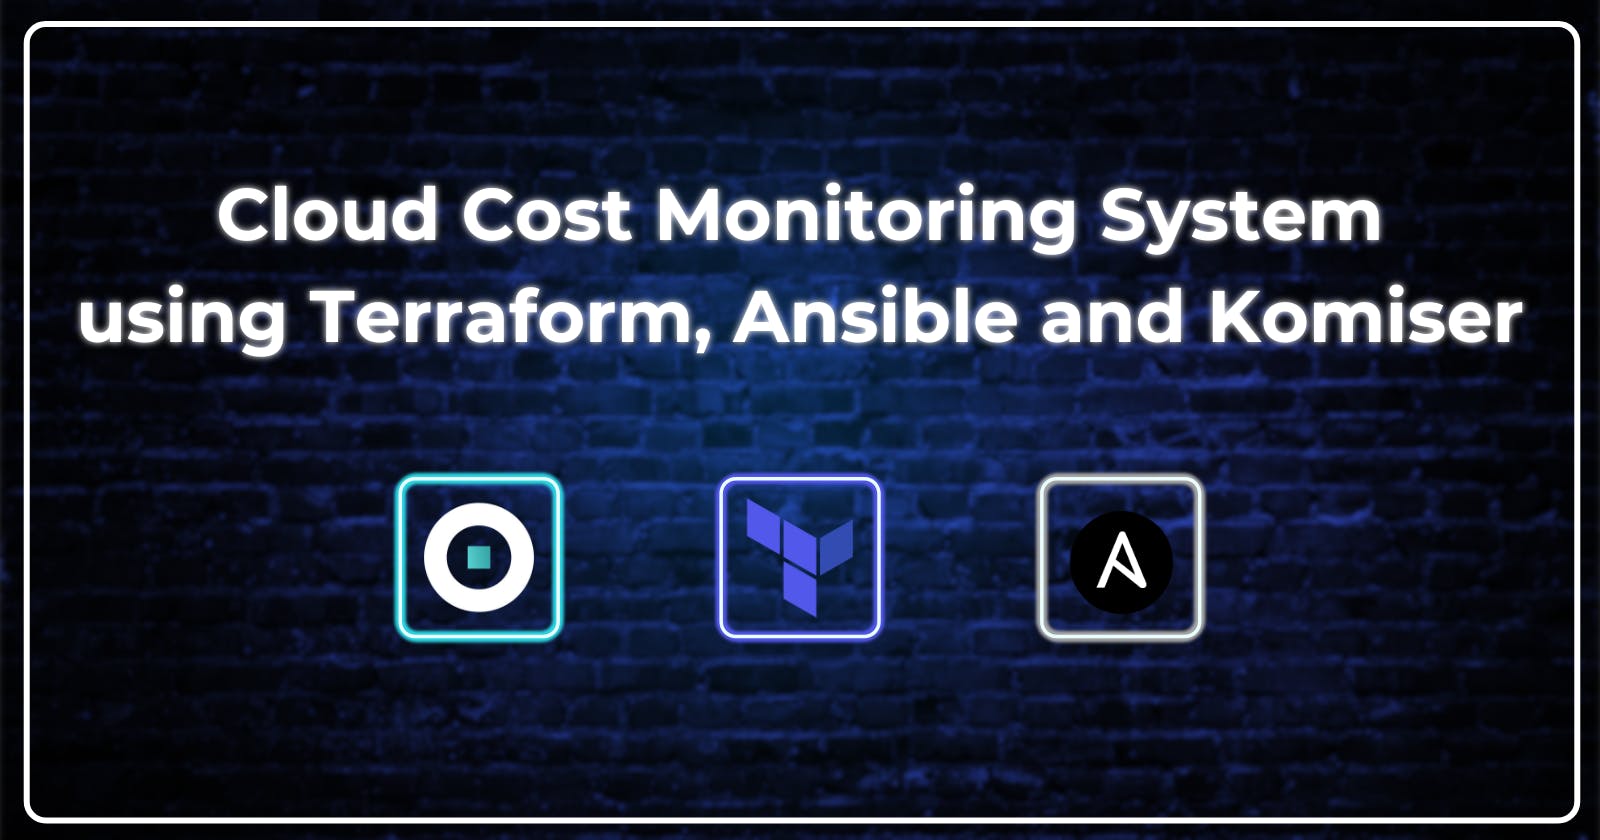 Tutorial: Build a Cloud Cost Monitoring System with Terraform, Ansible and Komiser